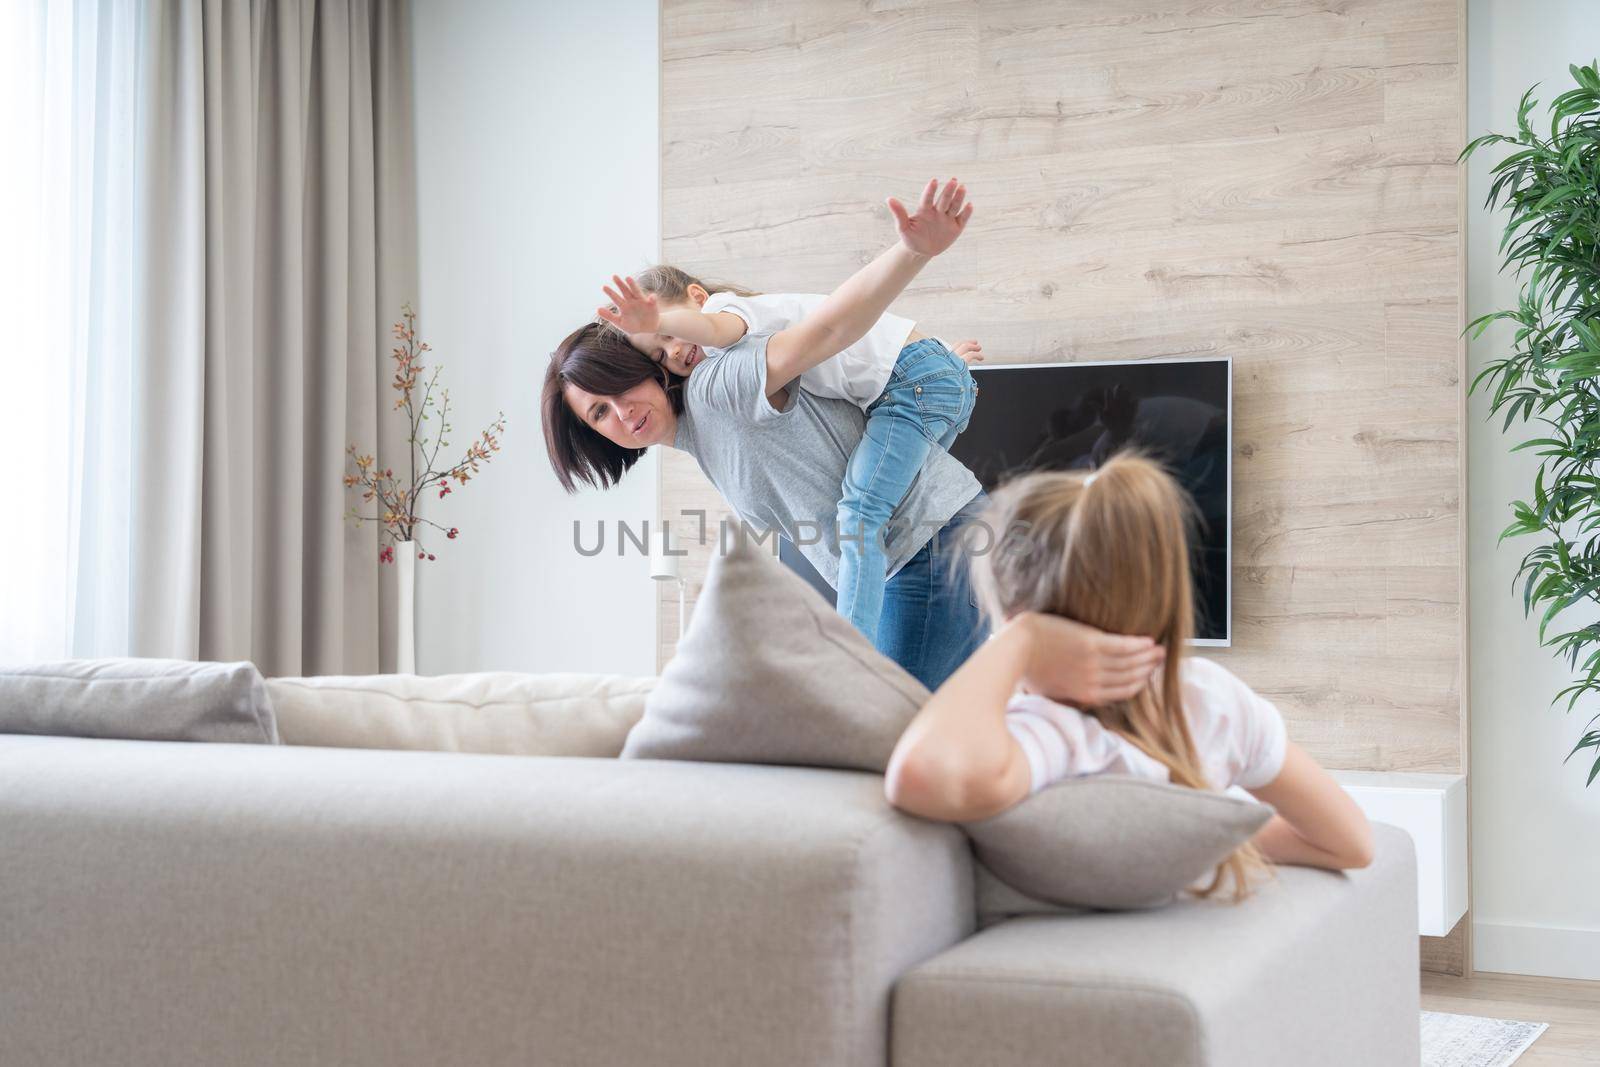 Preteen sad girl sitting on couch while mother having fun with younger sister, jealousy concept by Mariakray